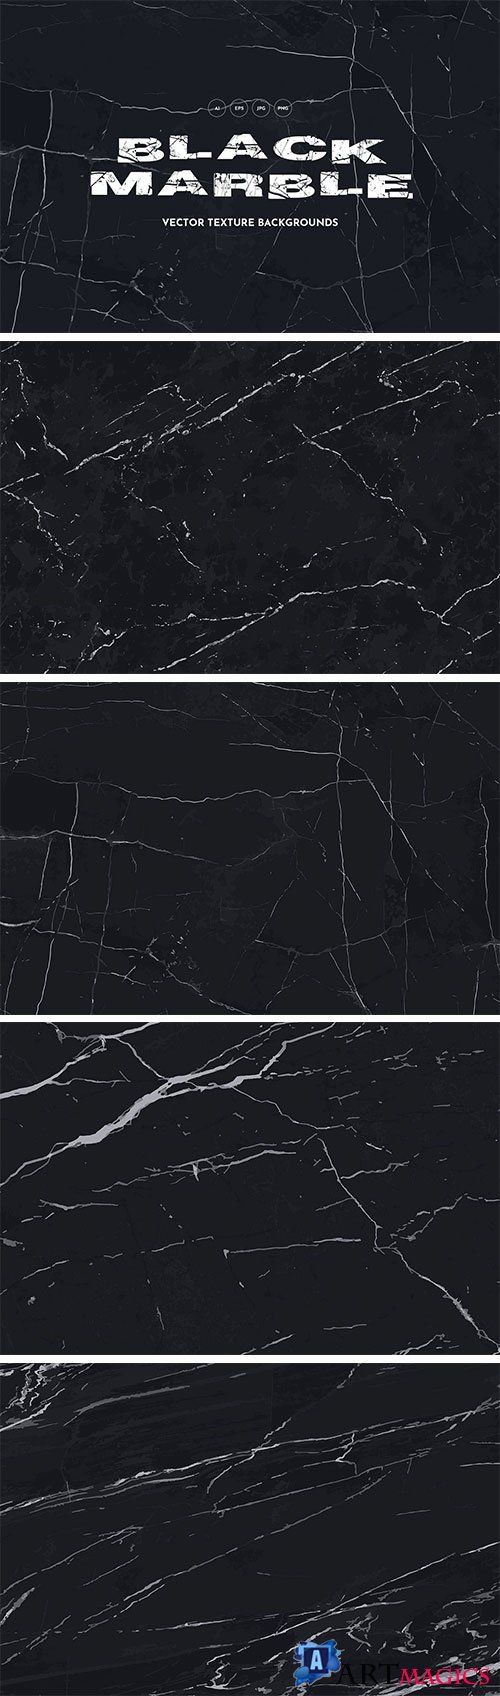 Black Marble Vector Texture Backgrounds